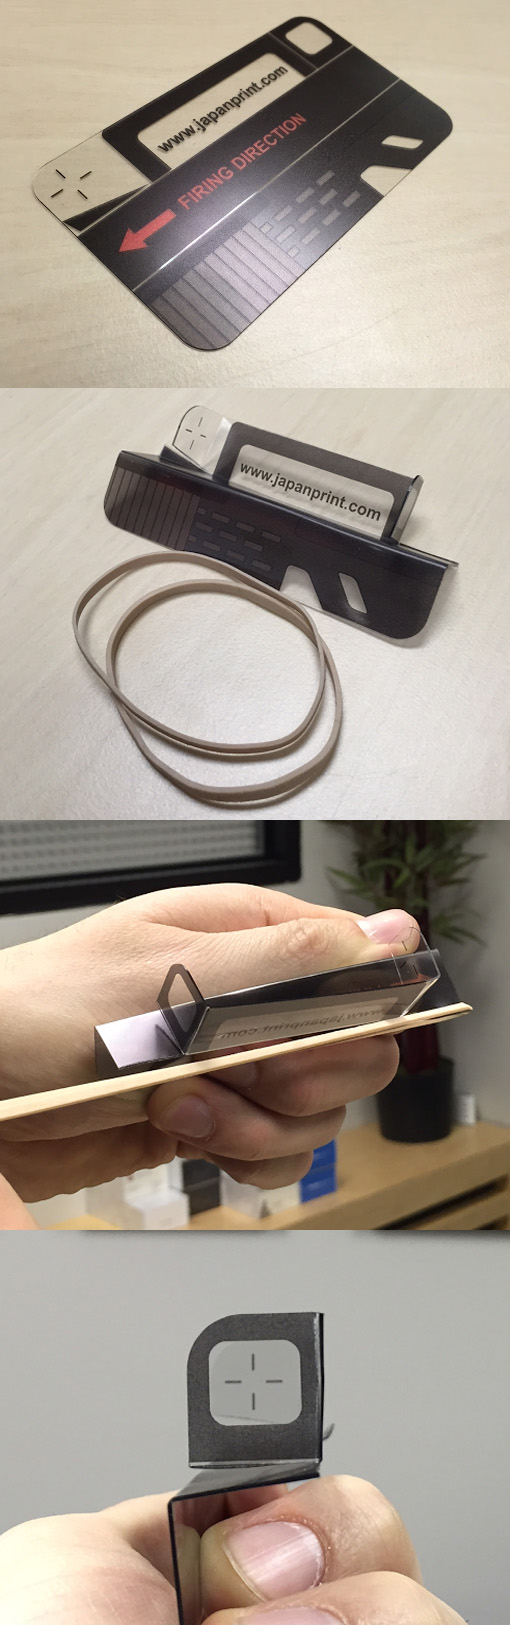 Clever 3D Plastic Folding Business Card Becomes A Rubber Band Shooter